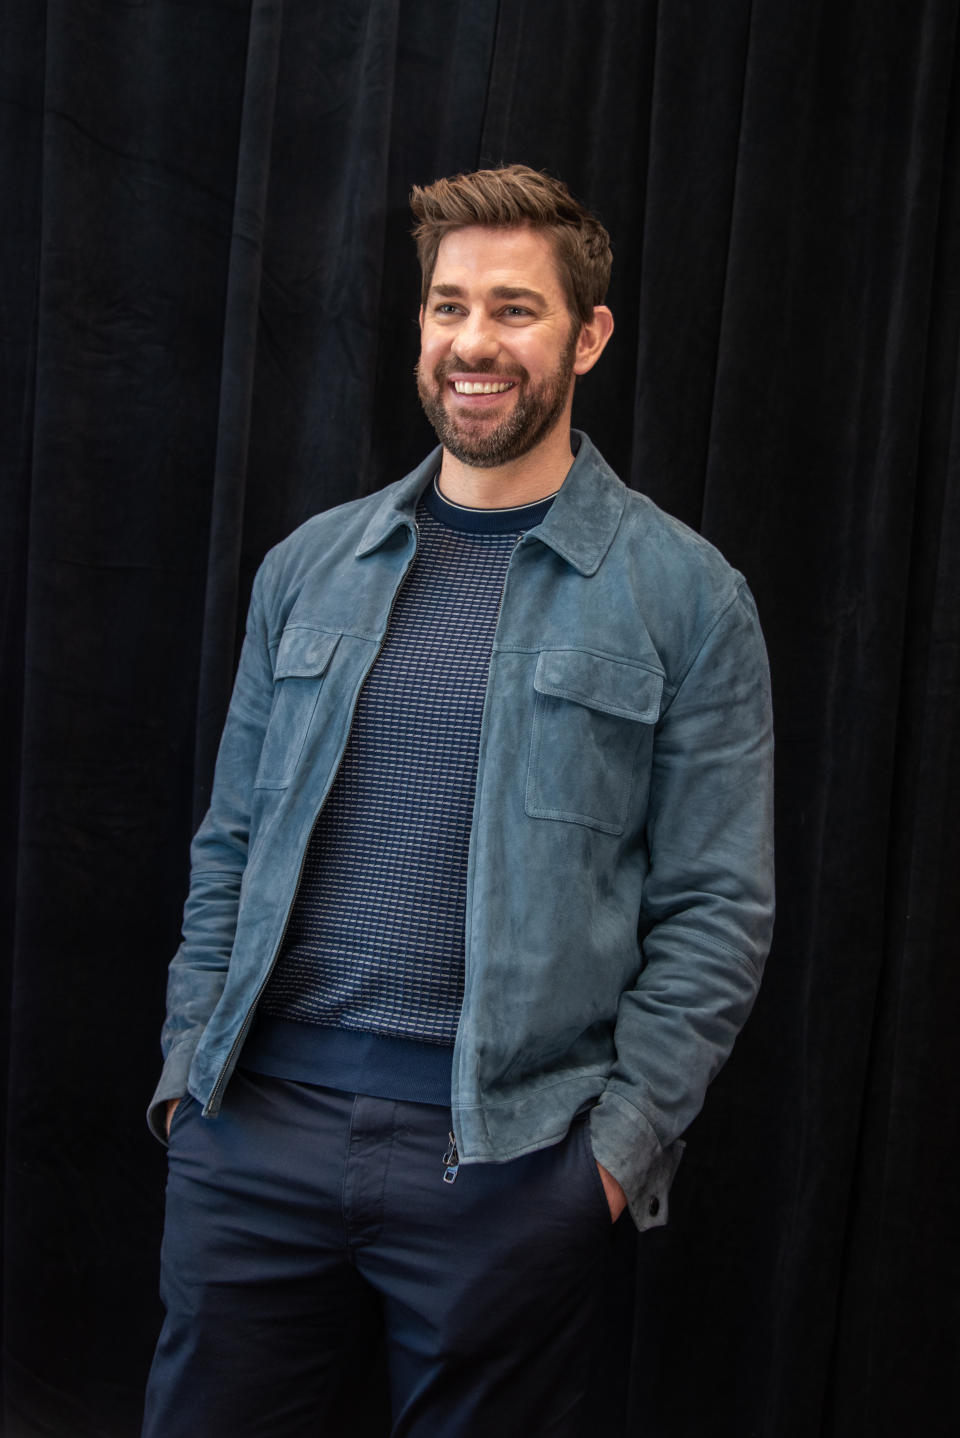 NEW YORK, NEW YORK - MARCH 08: John Krasinski at the "A Quiet Place Part II" Press Conference at the Mandarin Oriental Hotel on March 08, 2020 in New York City. (Photo by Vera Anderson/WireImage)